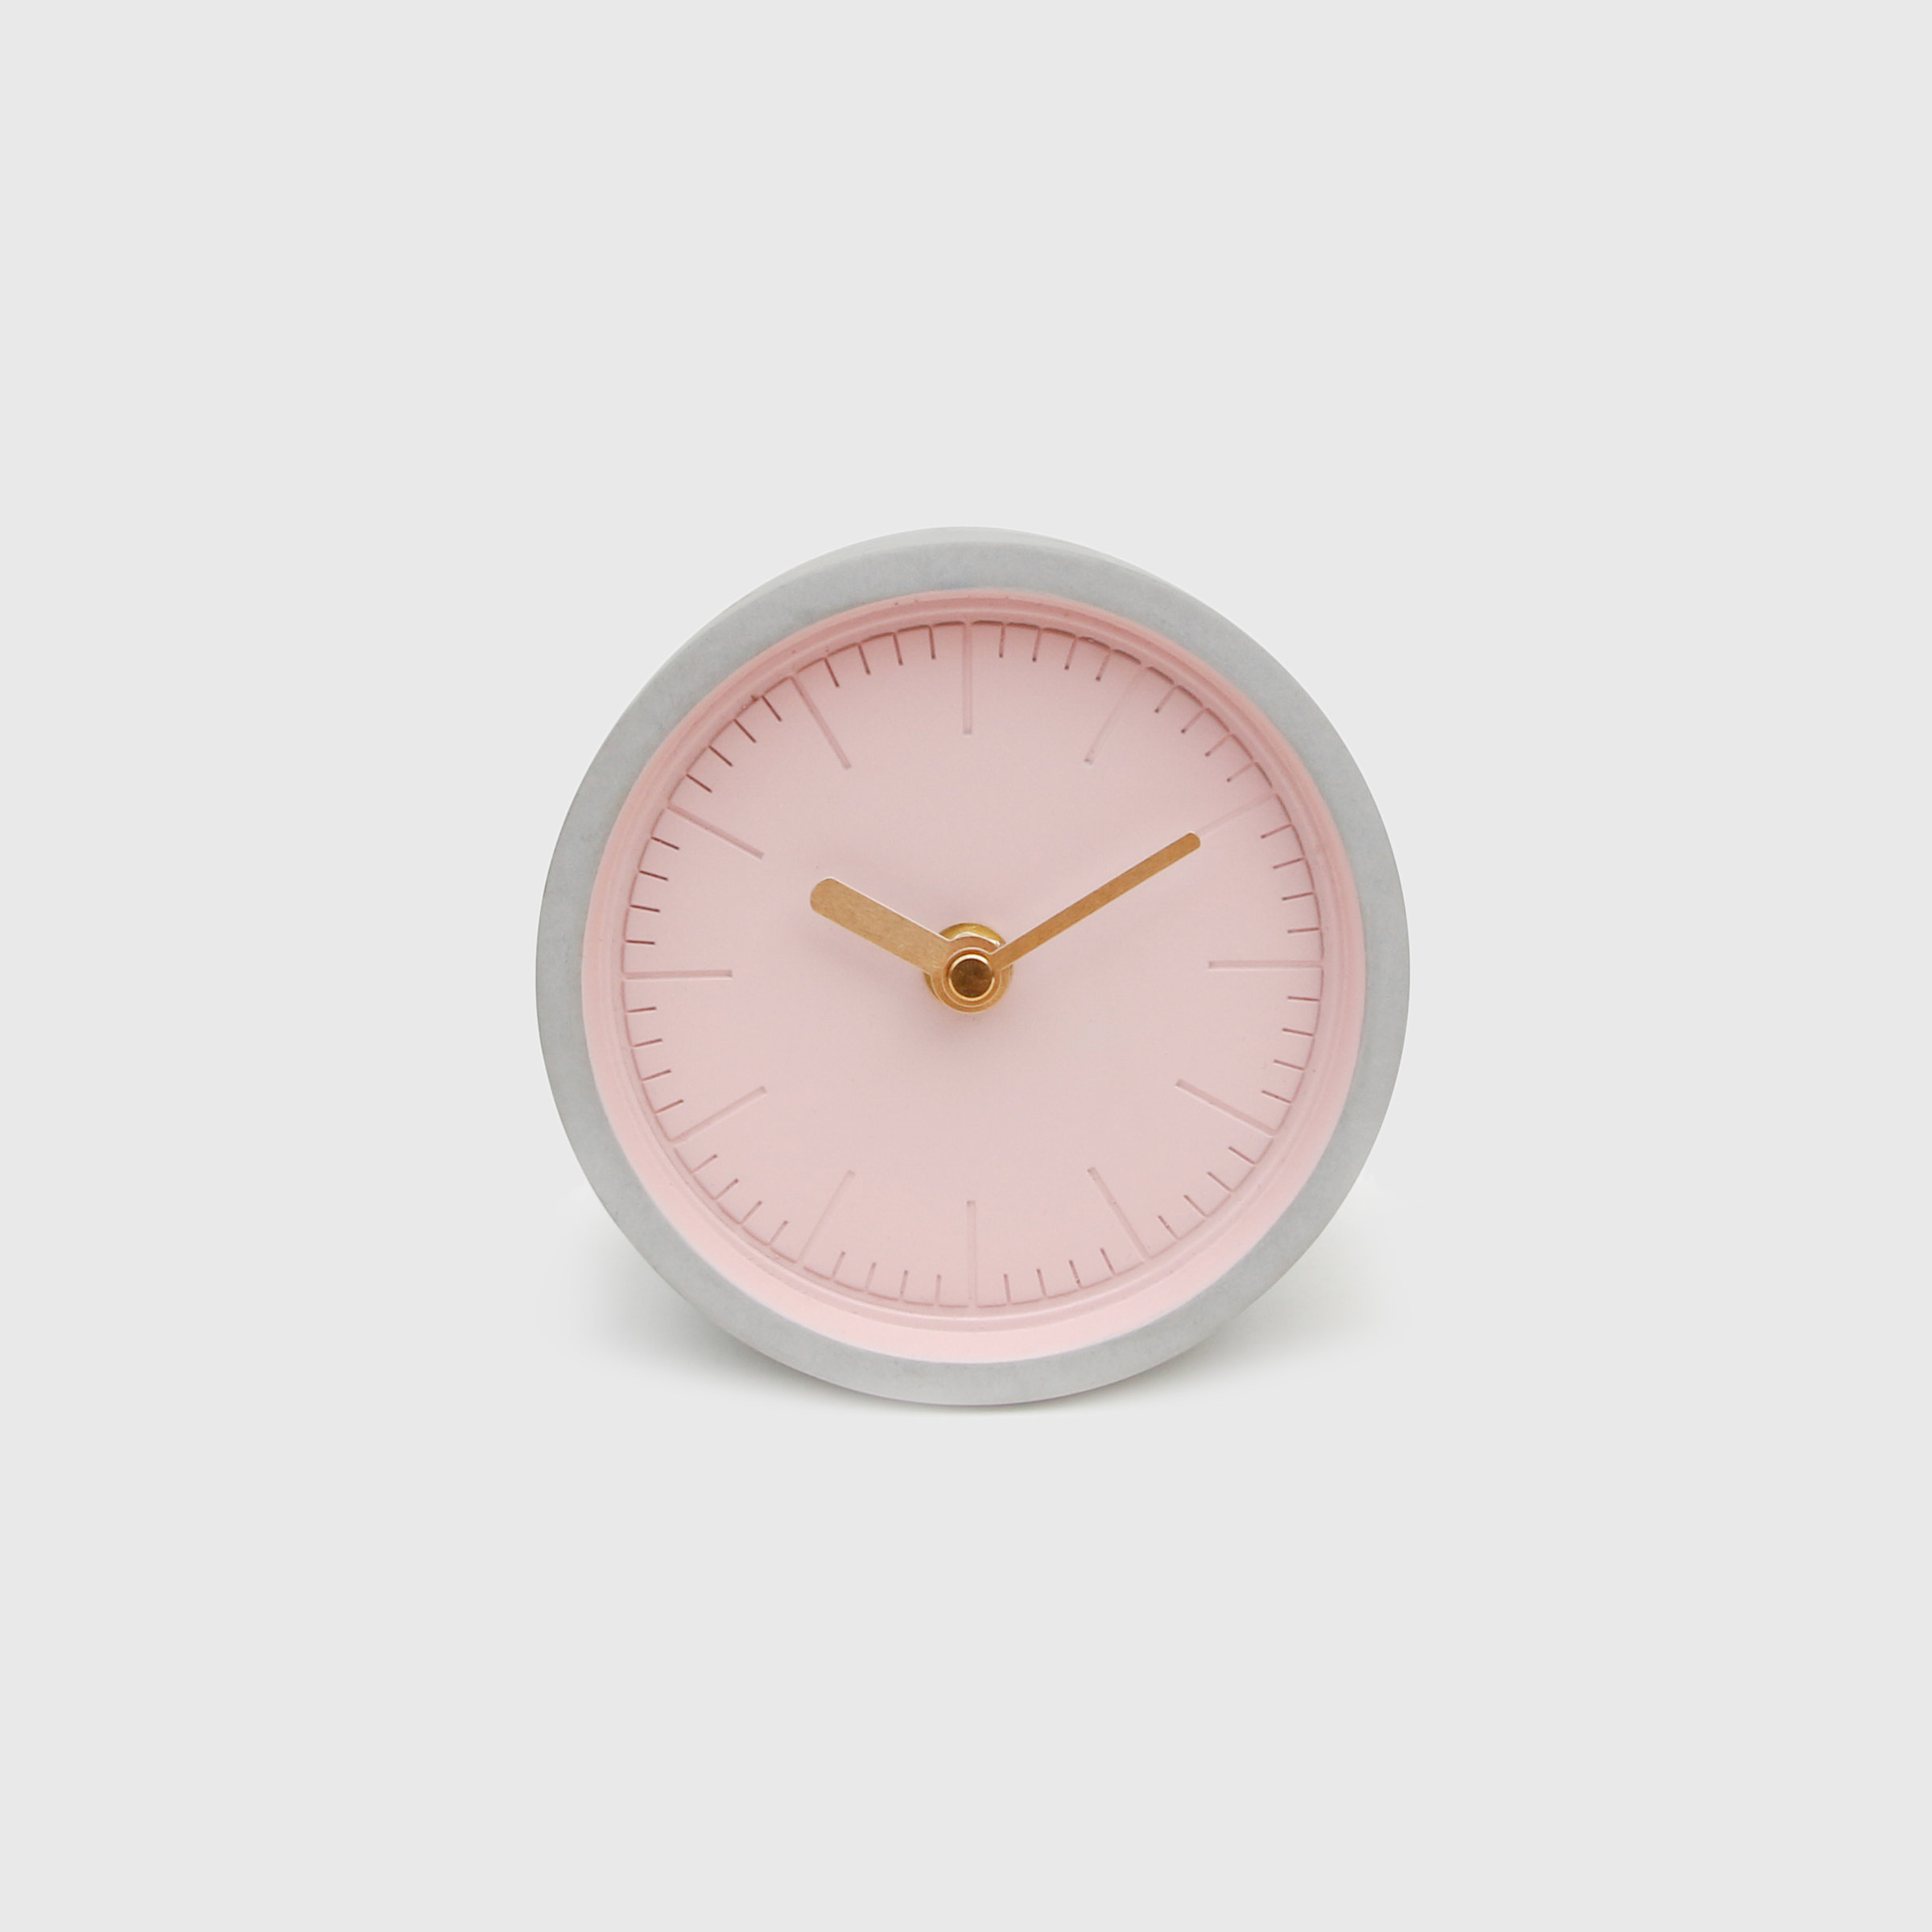 Concrete Clock in cool pink